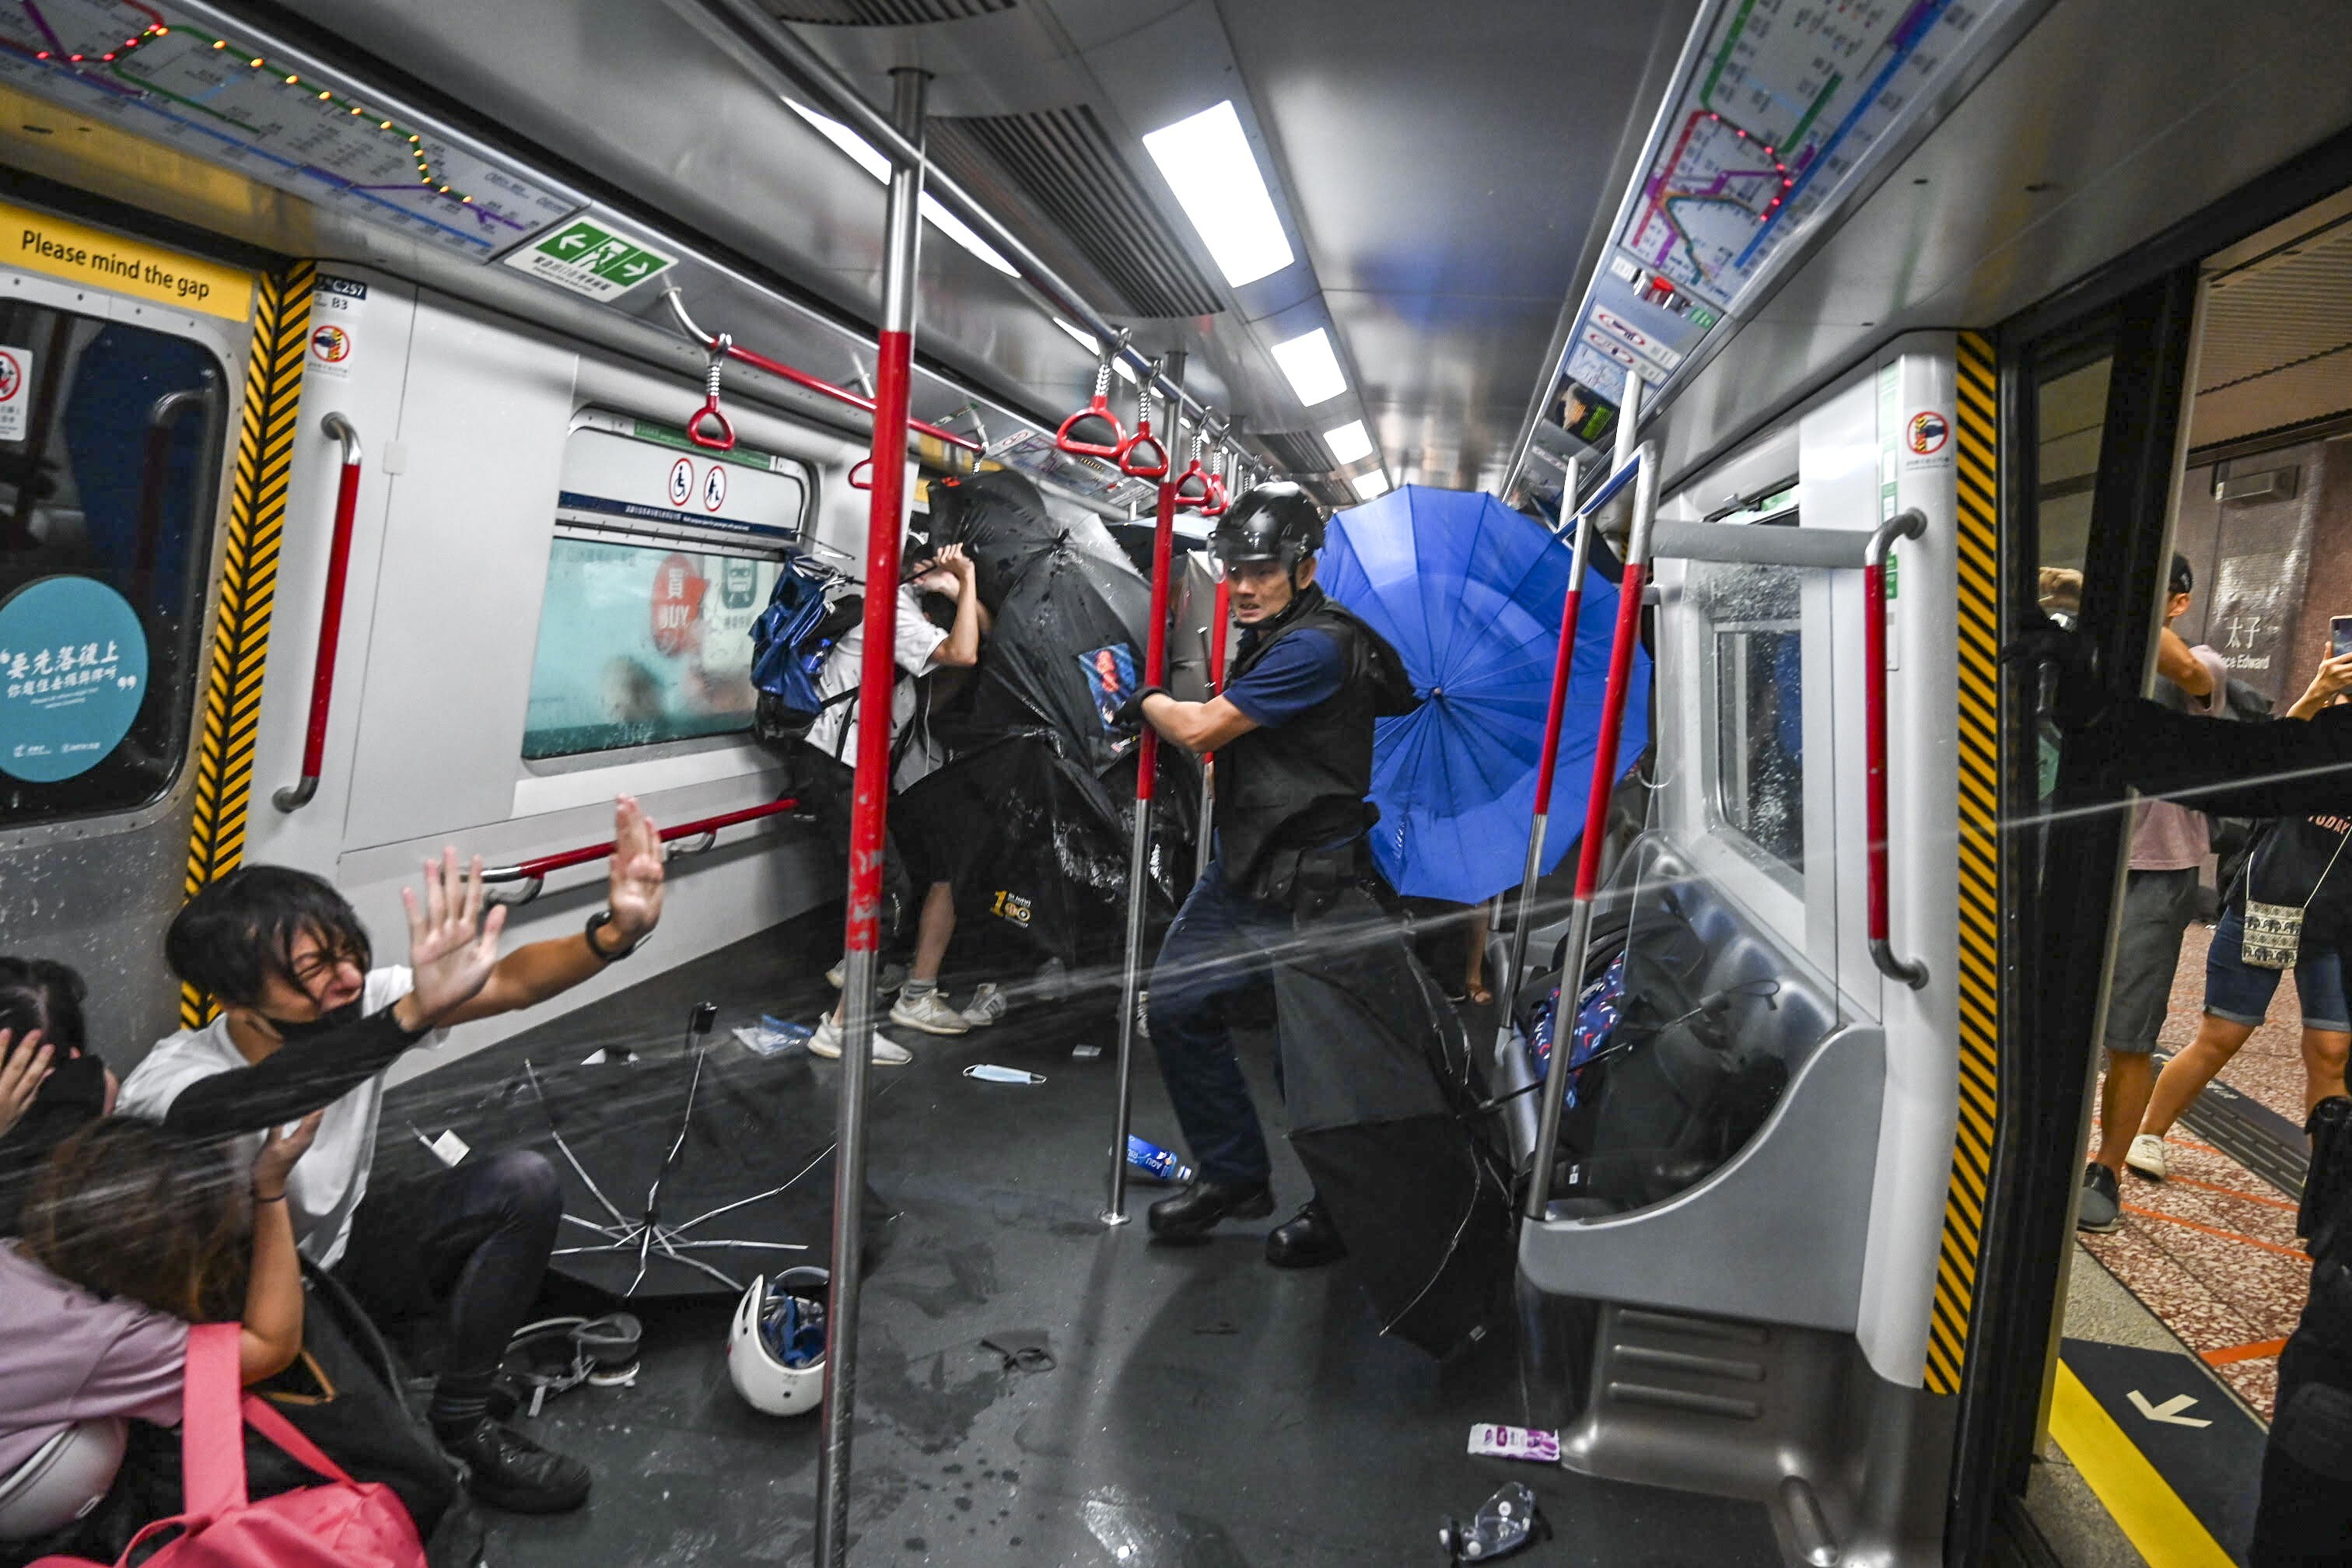 Police use force on people inside an MTR train at Prince Edward station in August. Photo: Handout